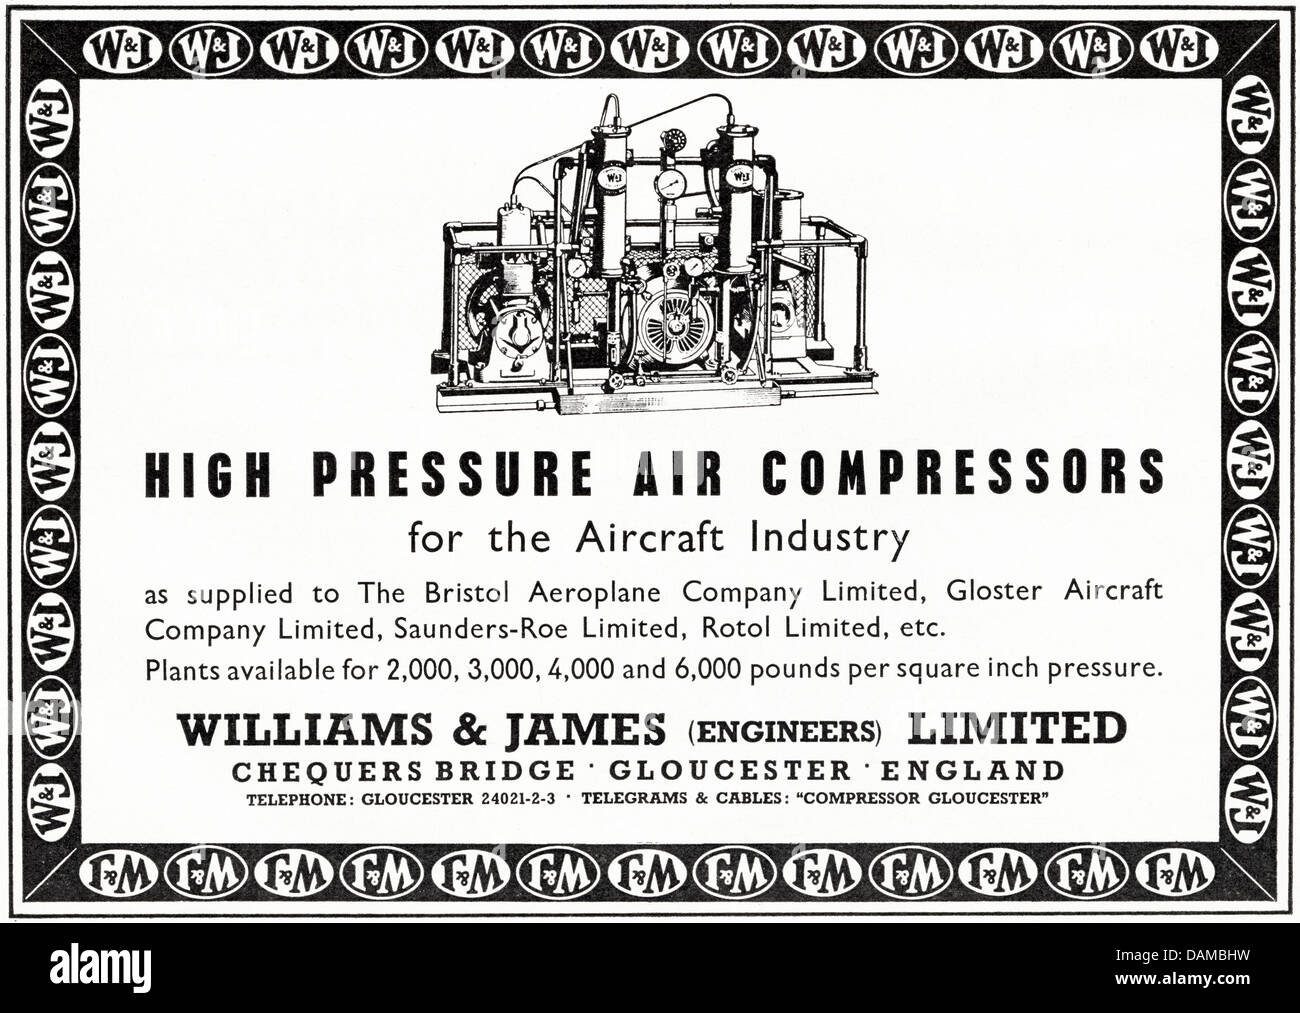 Advert for Williams & James Ltd of Gloucester England UK high pressure air compressors suppliers to the aircraft industry advertisement in trade magazine circa 1955 Stock Photo